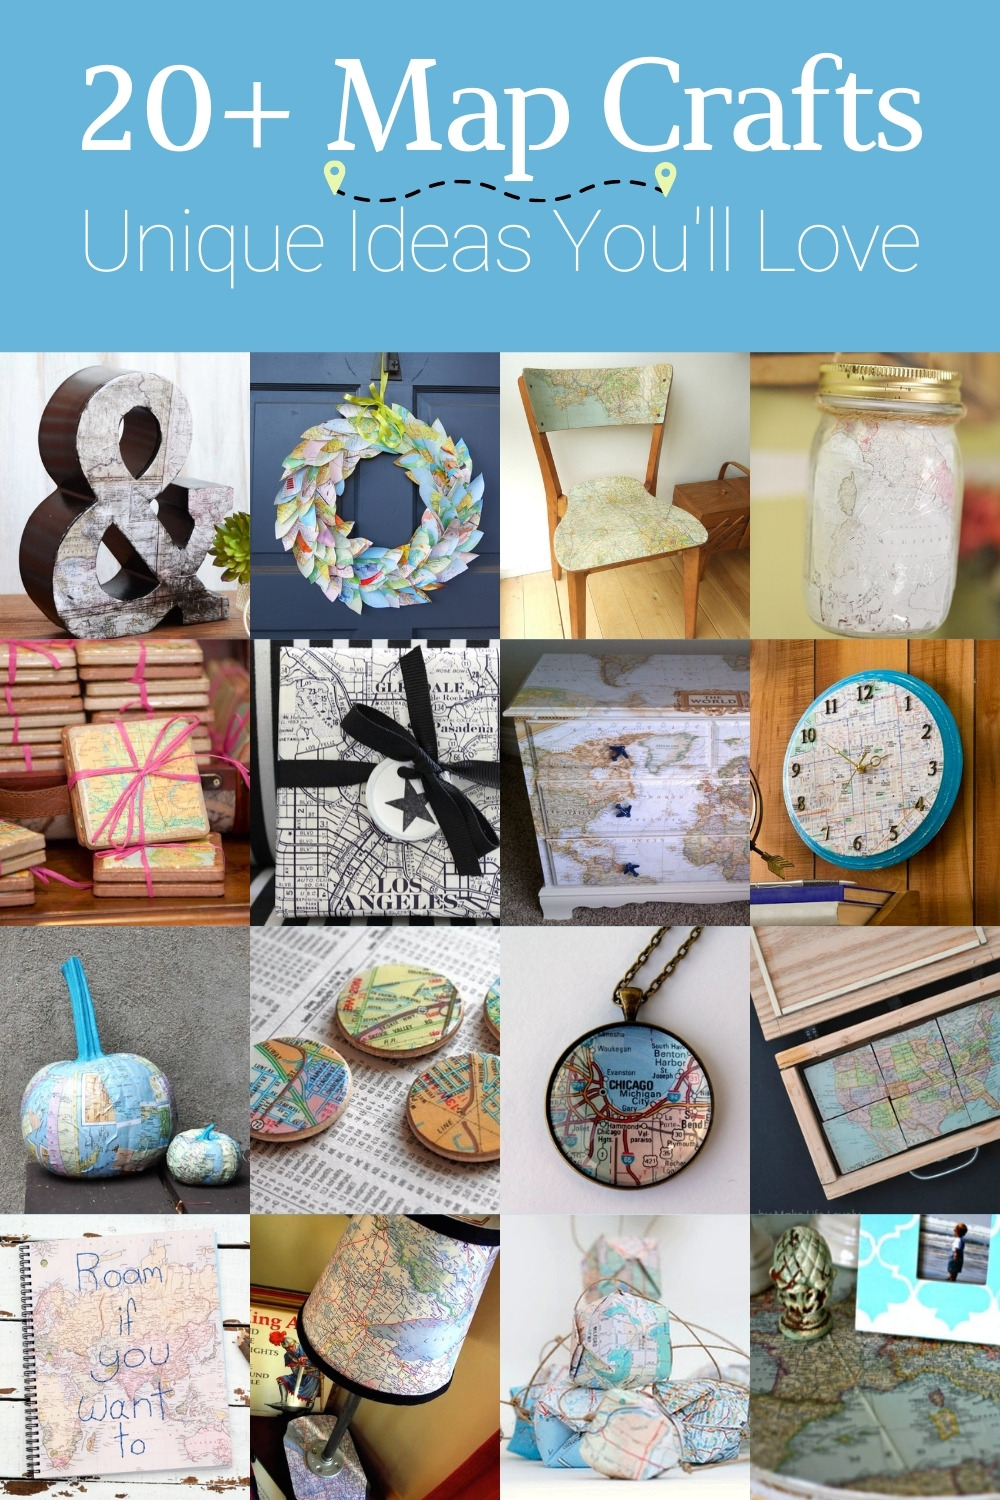 Over 20 Map Crafts You'll Love